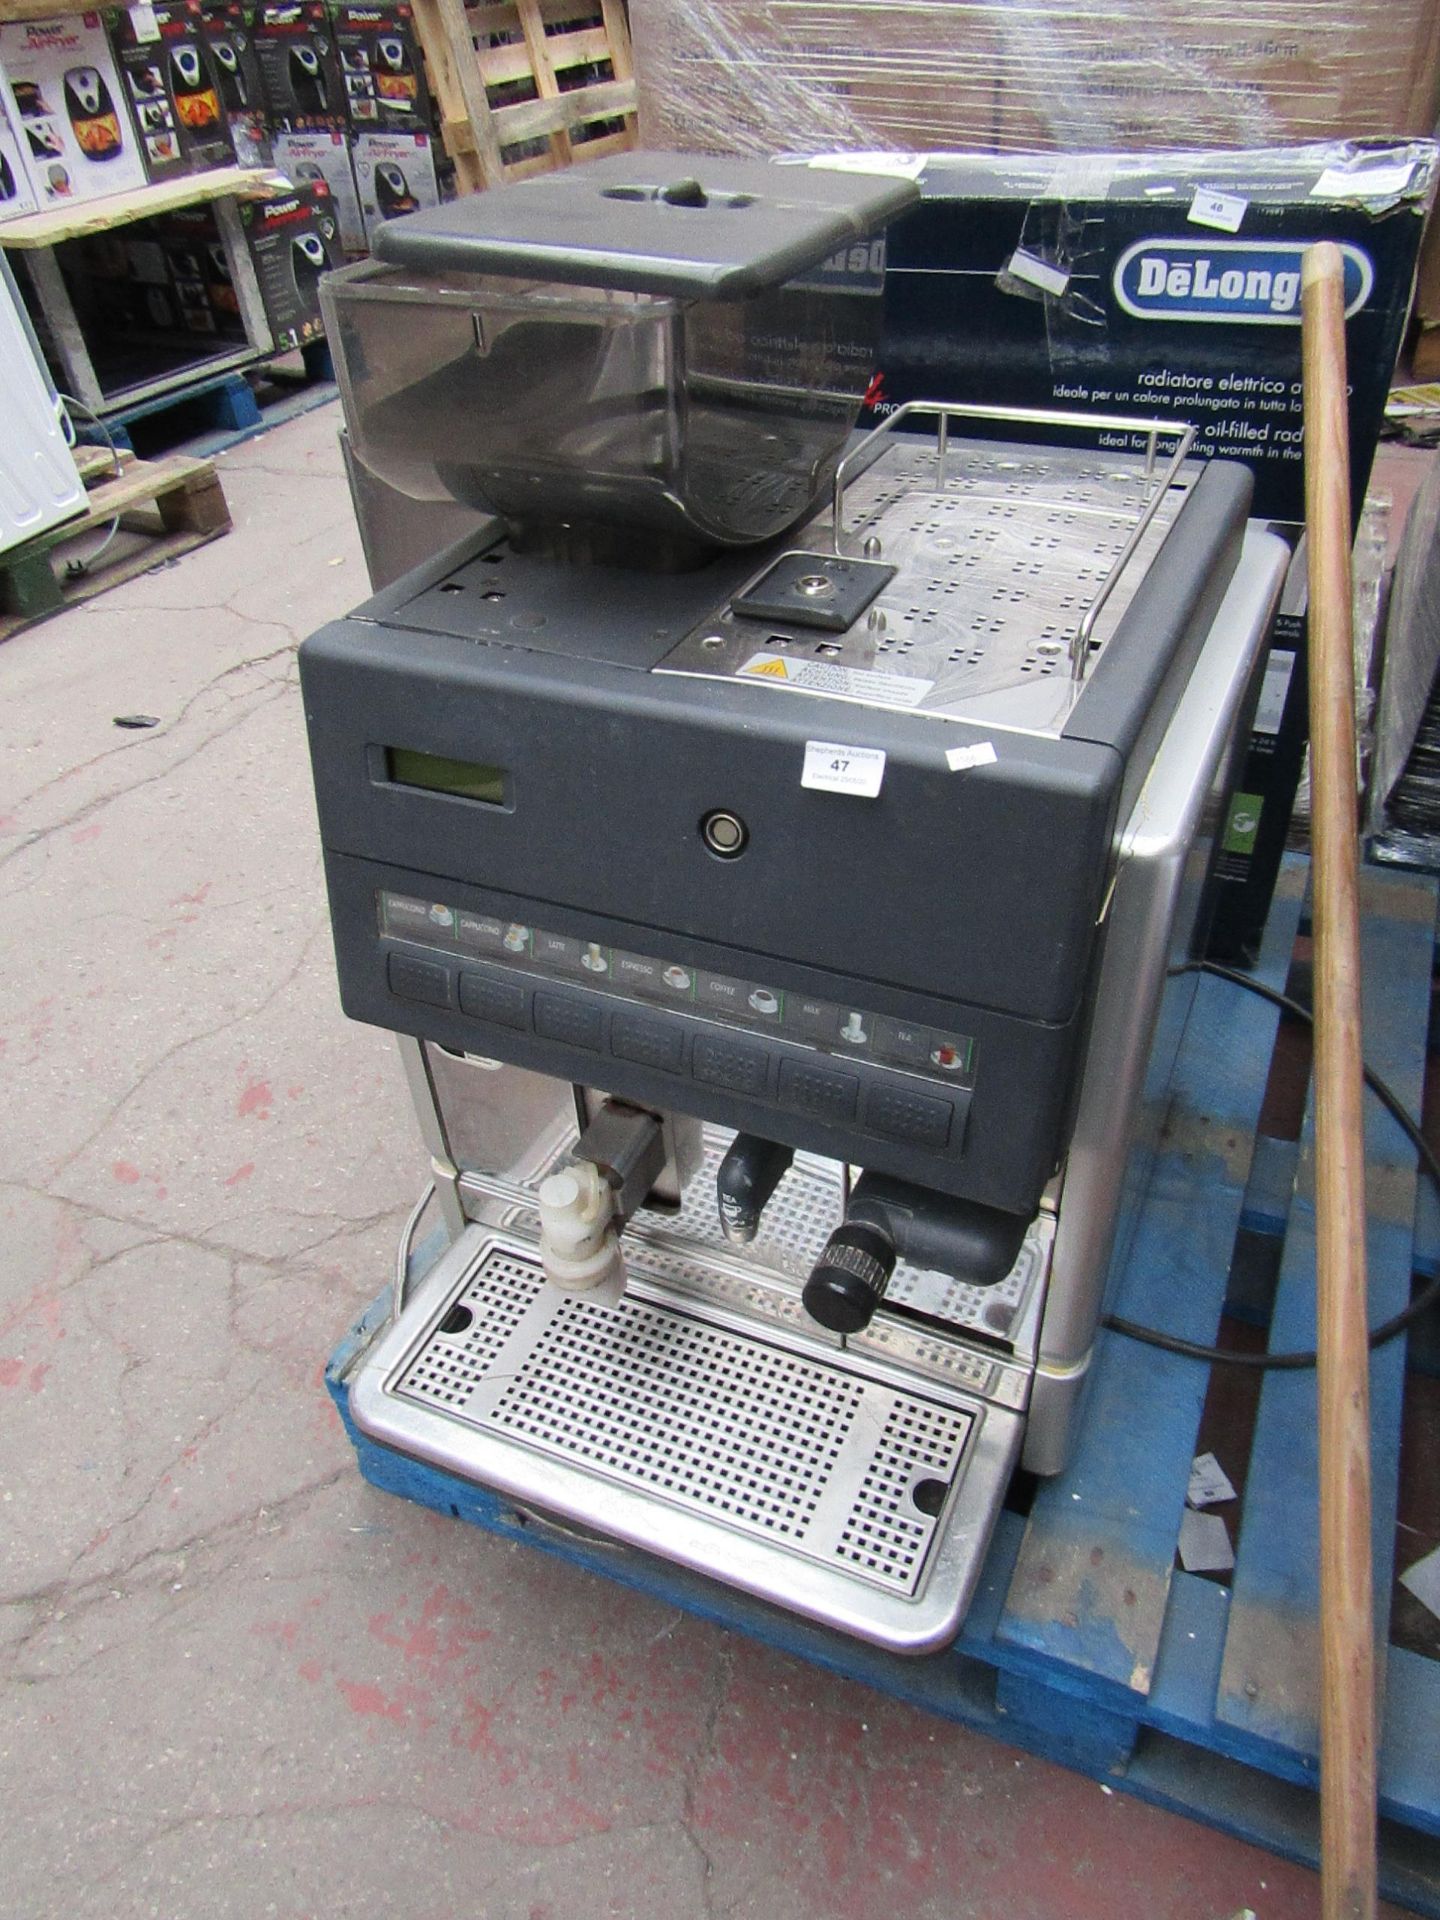 La Cimbali commercial coffee machine, appears to have no power. Similar products retail over £1500.